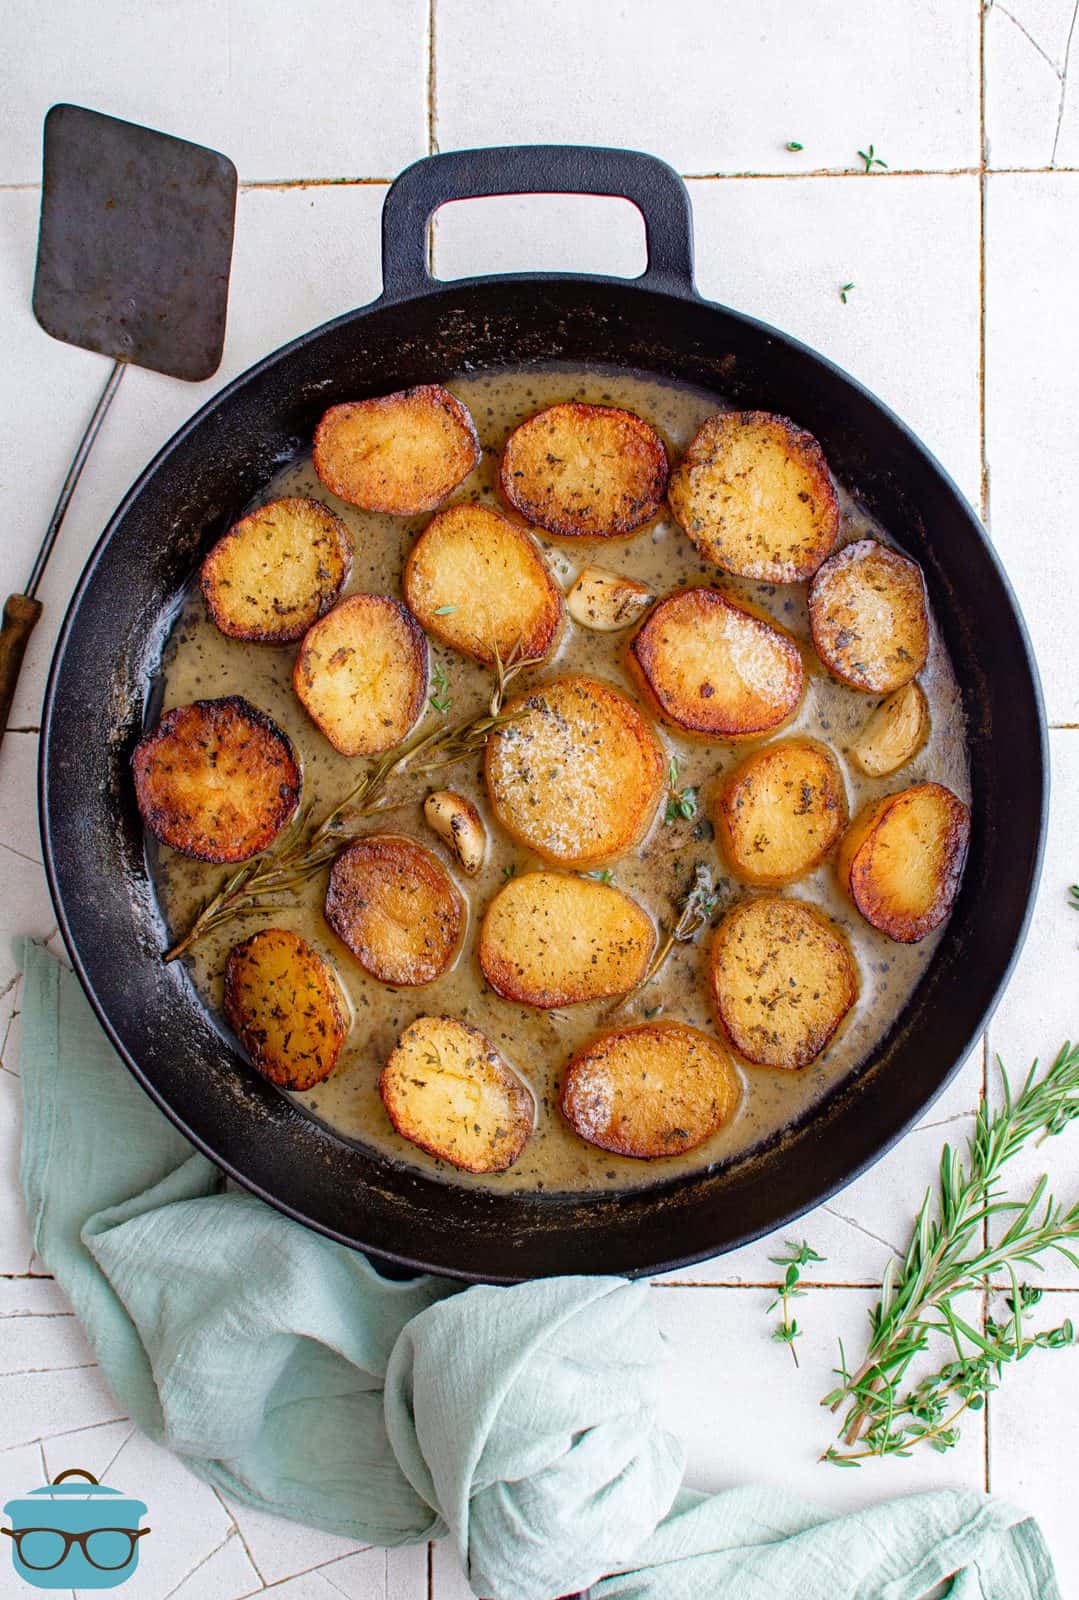 Finished Melting Potatoes in skillet with butter sauce and fresh herbs.